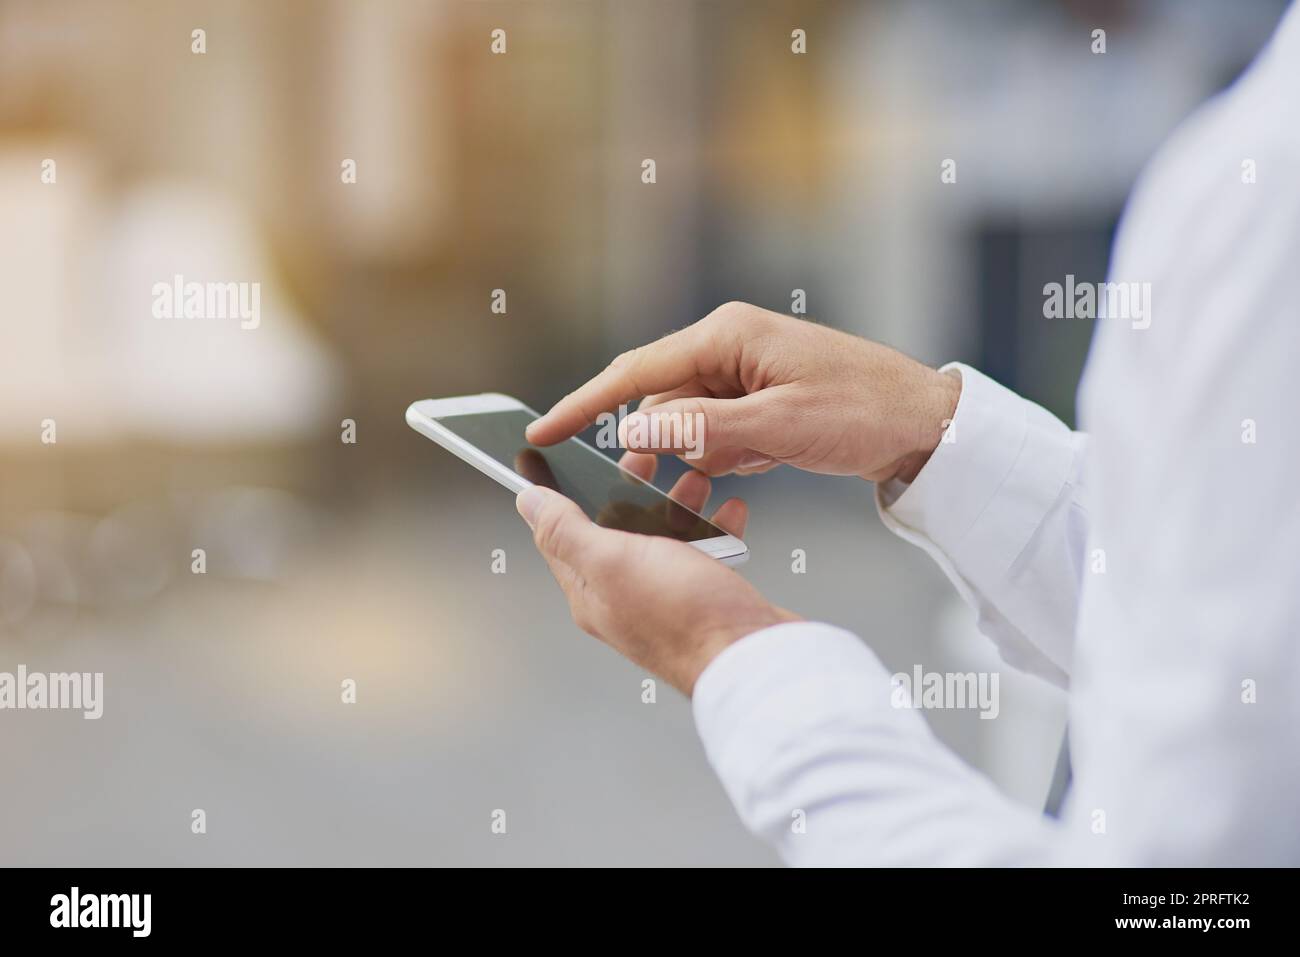 Sending out an update. an unrecognizable businessman using his cellphone. Stock Photo